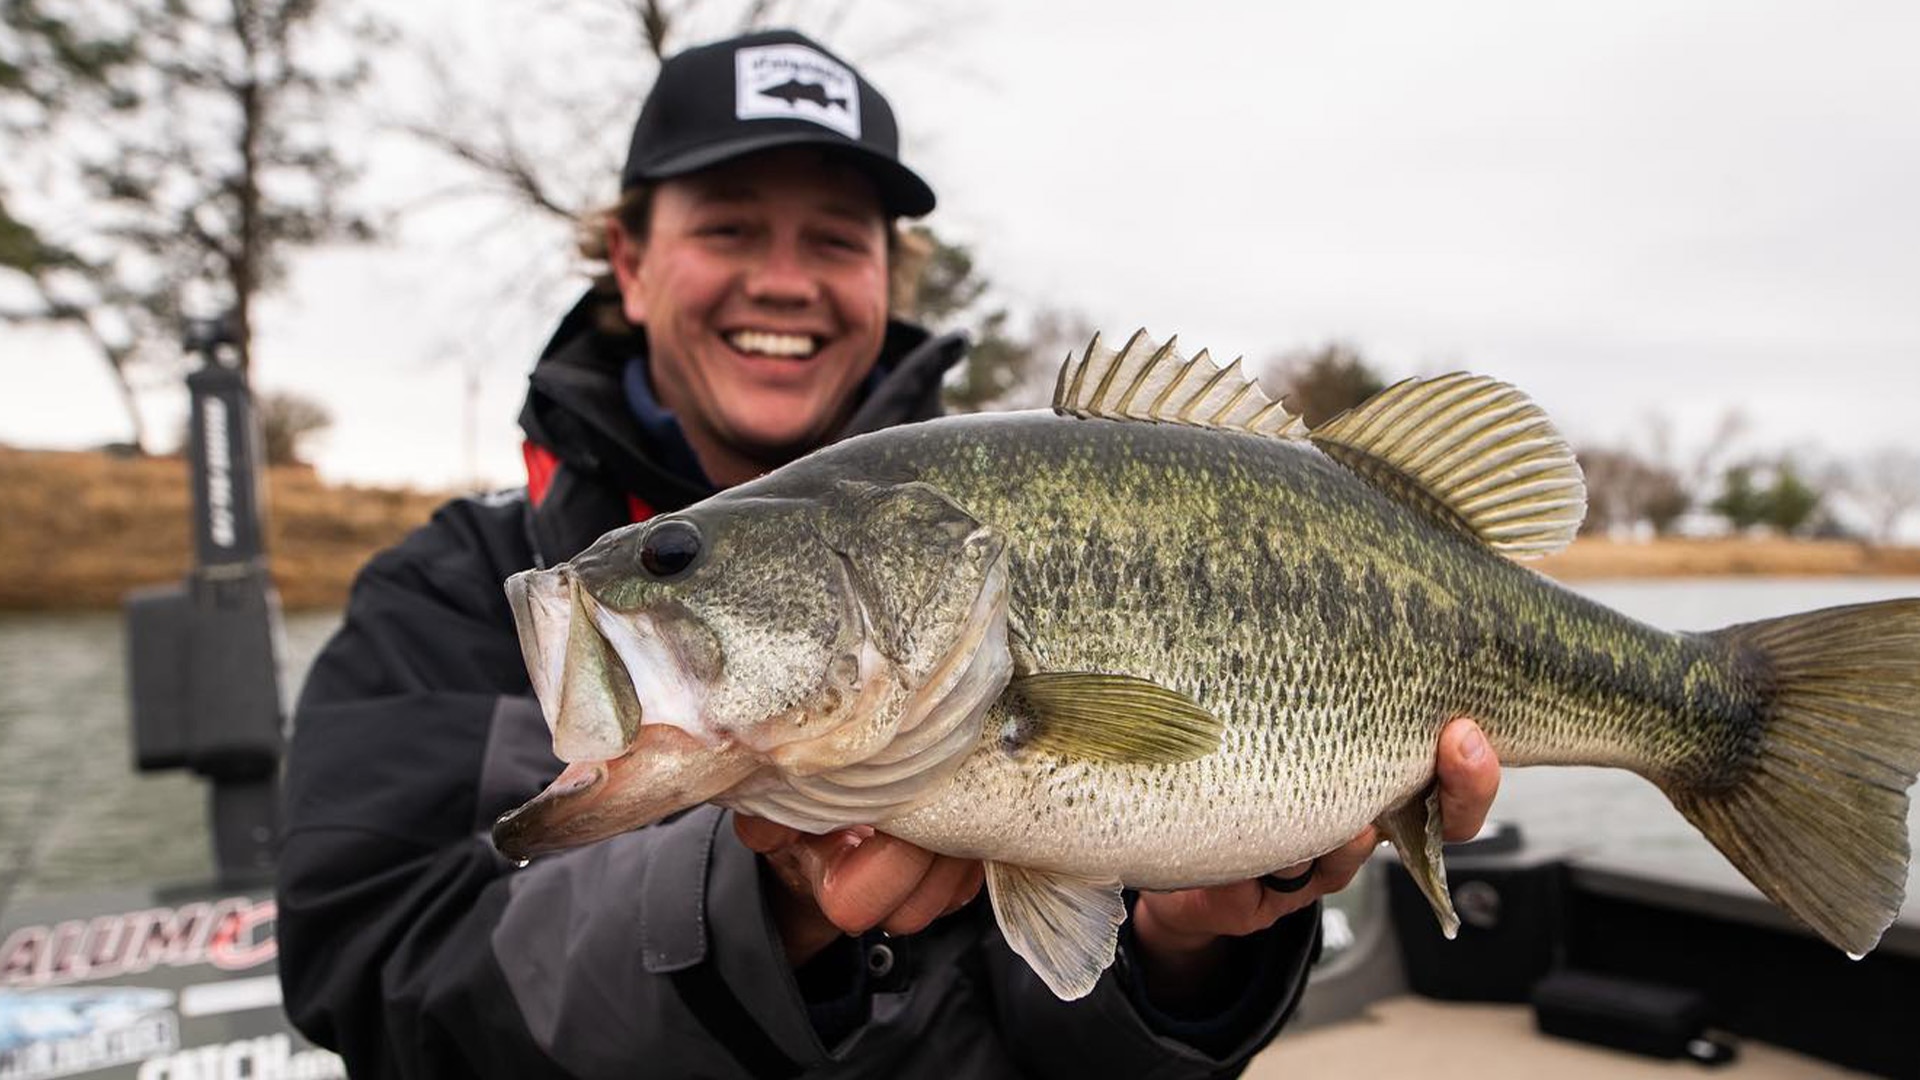 Jay Siemens, Alumacraft ambassador, smiling with another catch